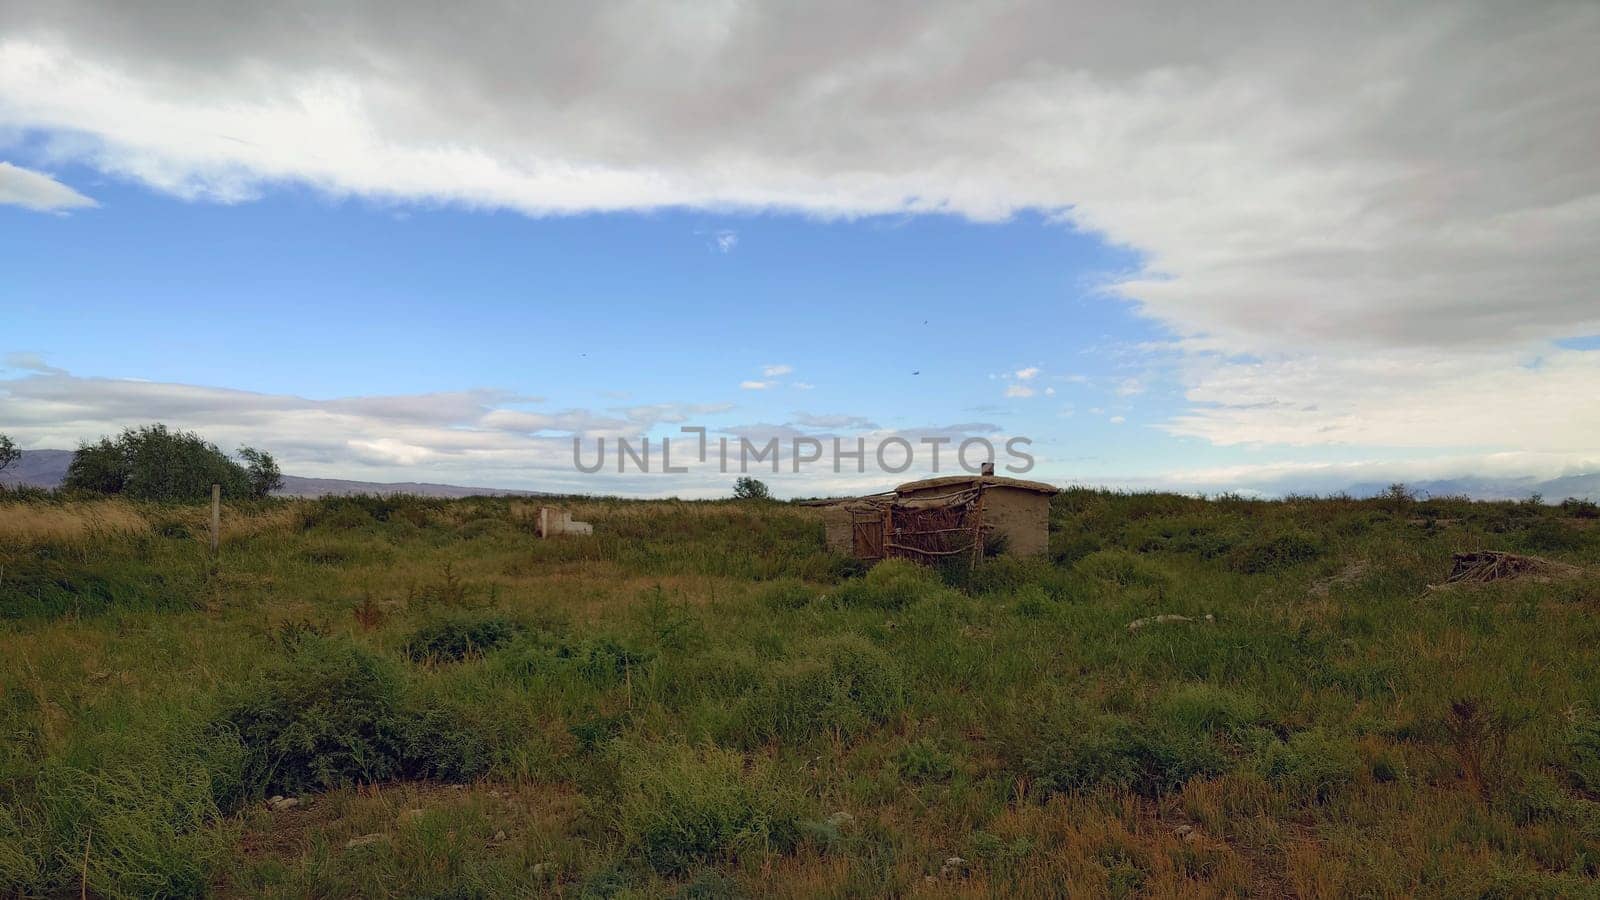 An abandoned old house among overgrown grass. Yellow-green grass. A clay house with a chimney. Wooden doors. Birds are flying. White clouds in a blue sky. A strong wind is blowing. Kazakhstan